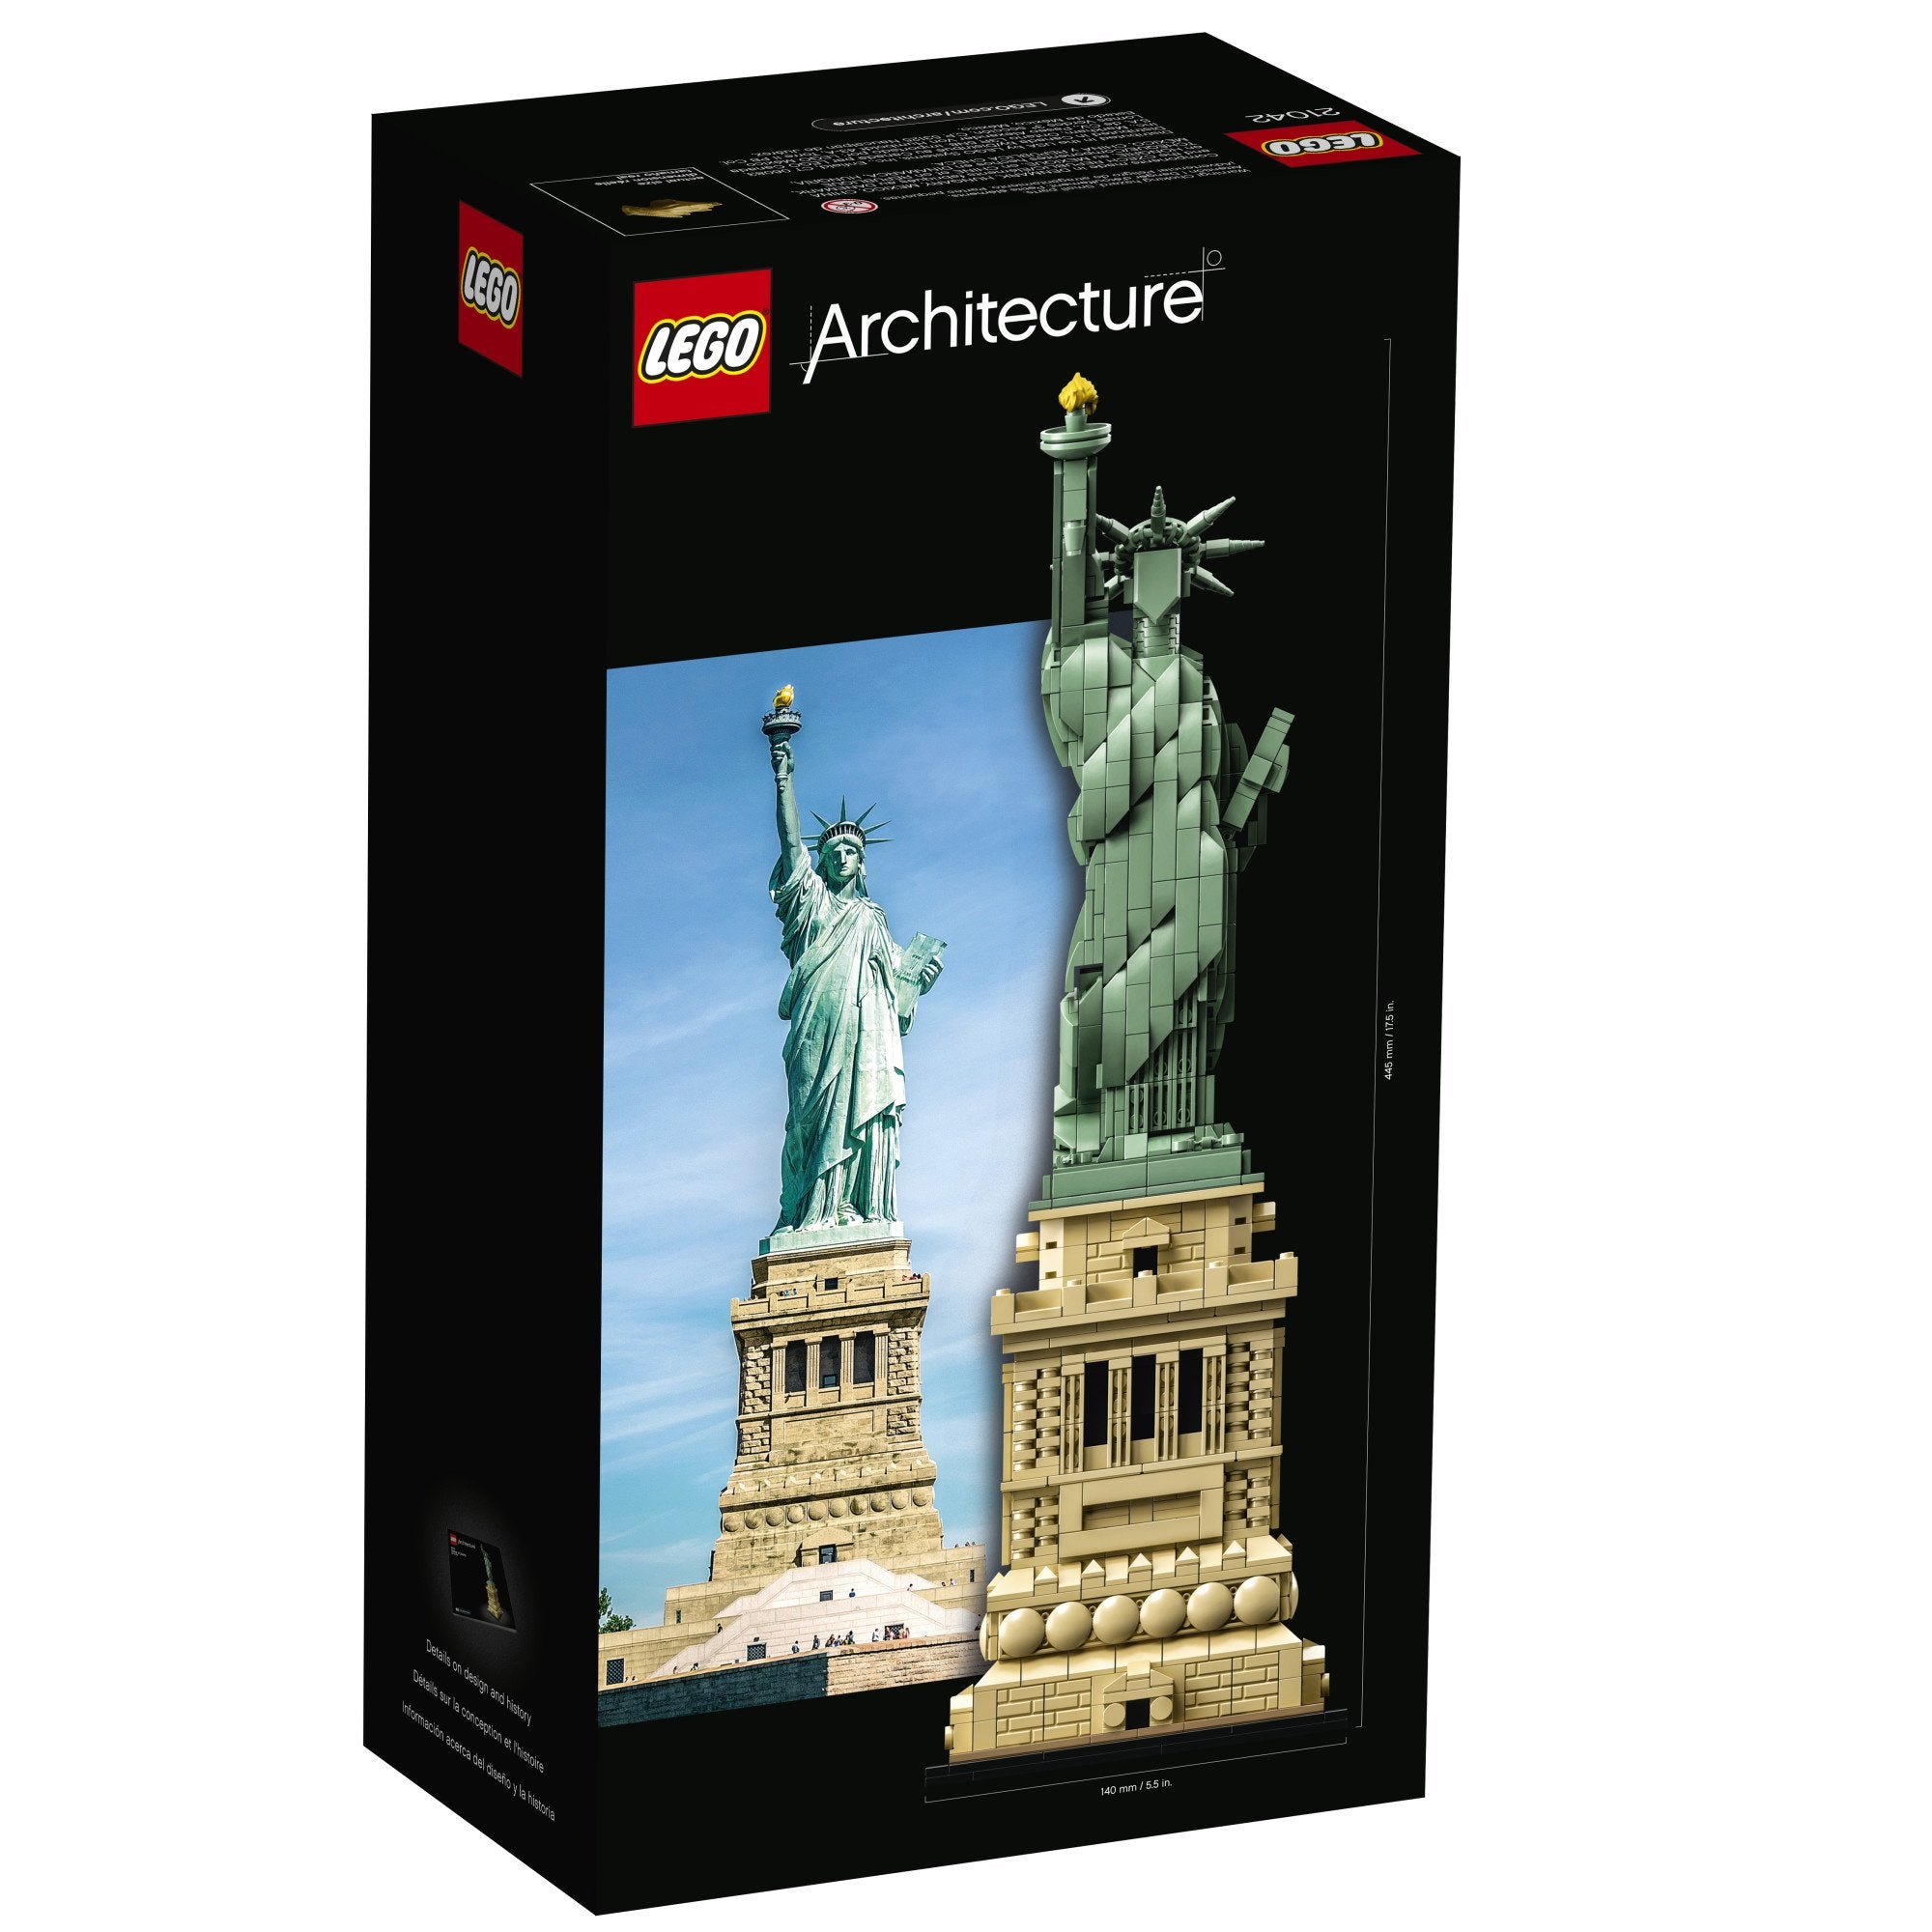 LEGO Architecture Statue of Liberty 21042 Building Kit (1685 Piece)